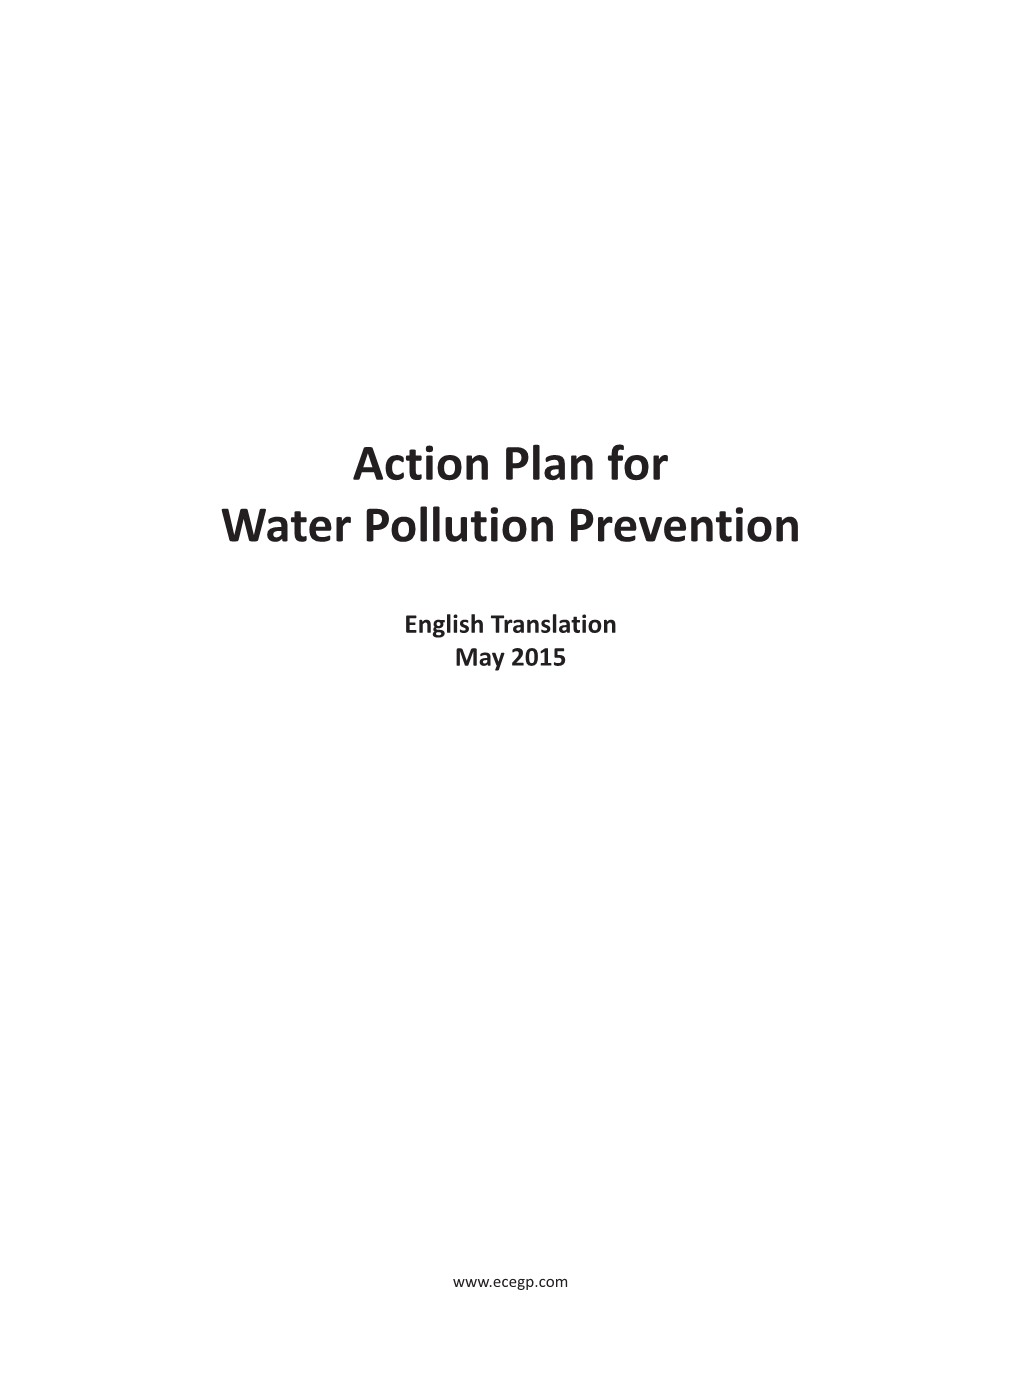 Action Plan for Water Pollution Prevention